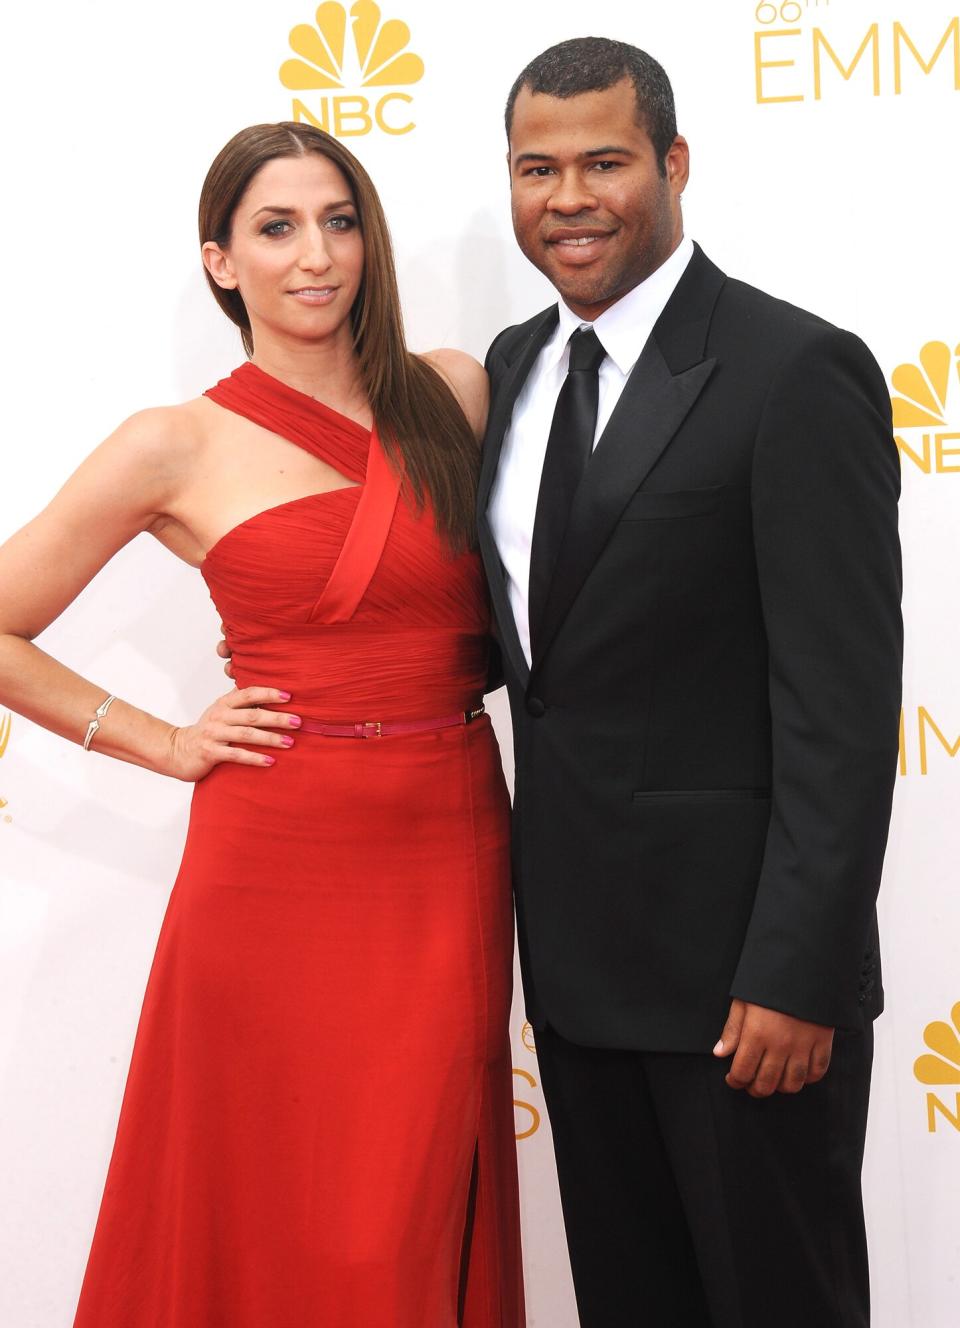 Jordan Peele and Chelsea Peretti arrive for the 66th Annual Primetime Emmy Awards held at Nokia Theatre L.A. Live on August 25, 2014 in Los Angeles, California